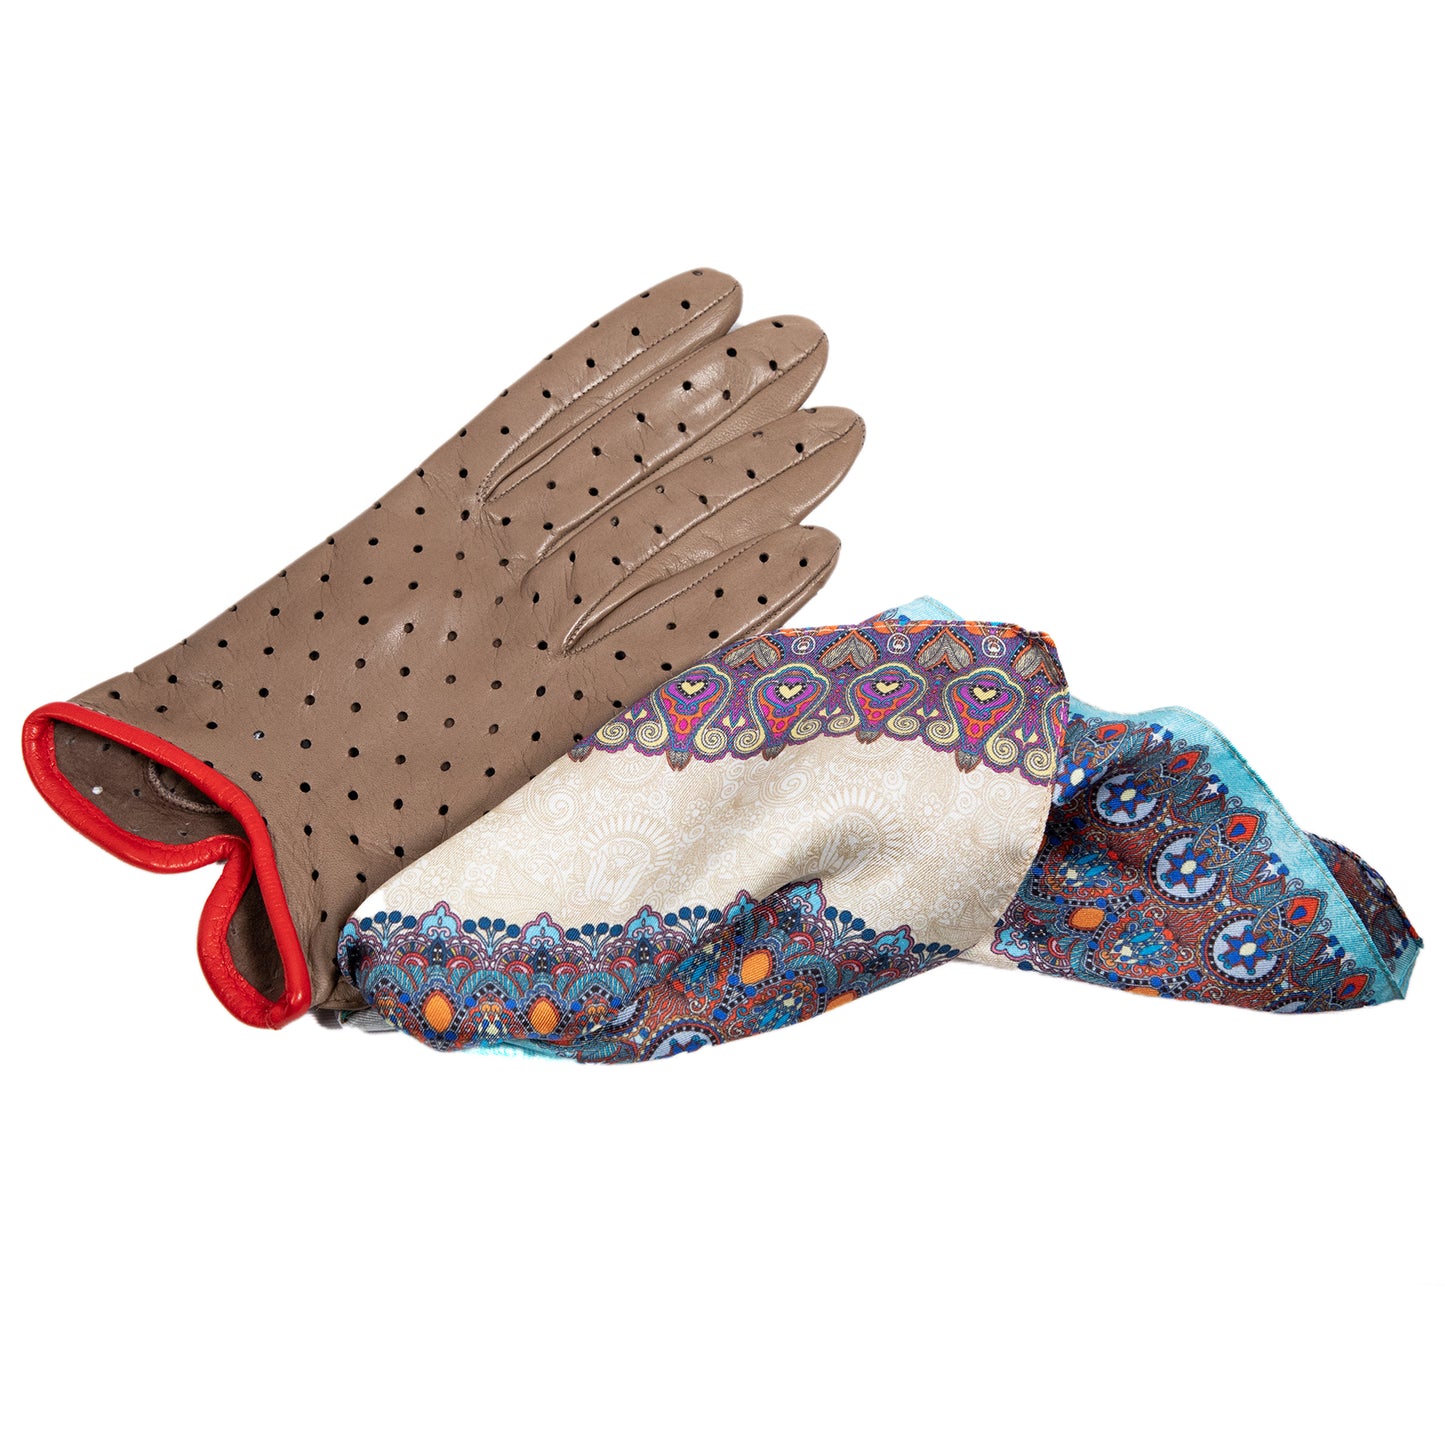 Women's unlined taupe nappa leather gloves with perforated pois detail